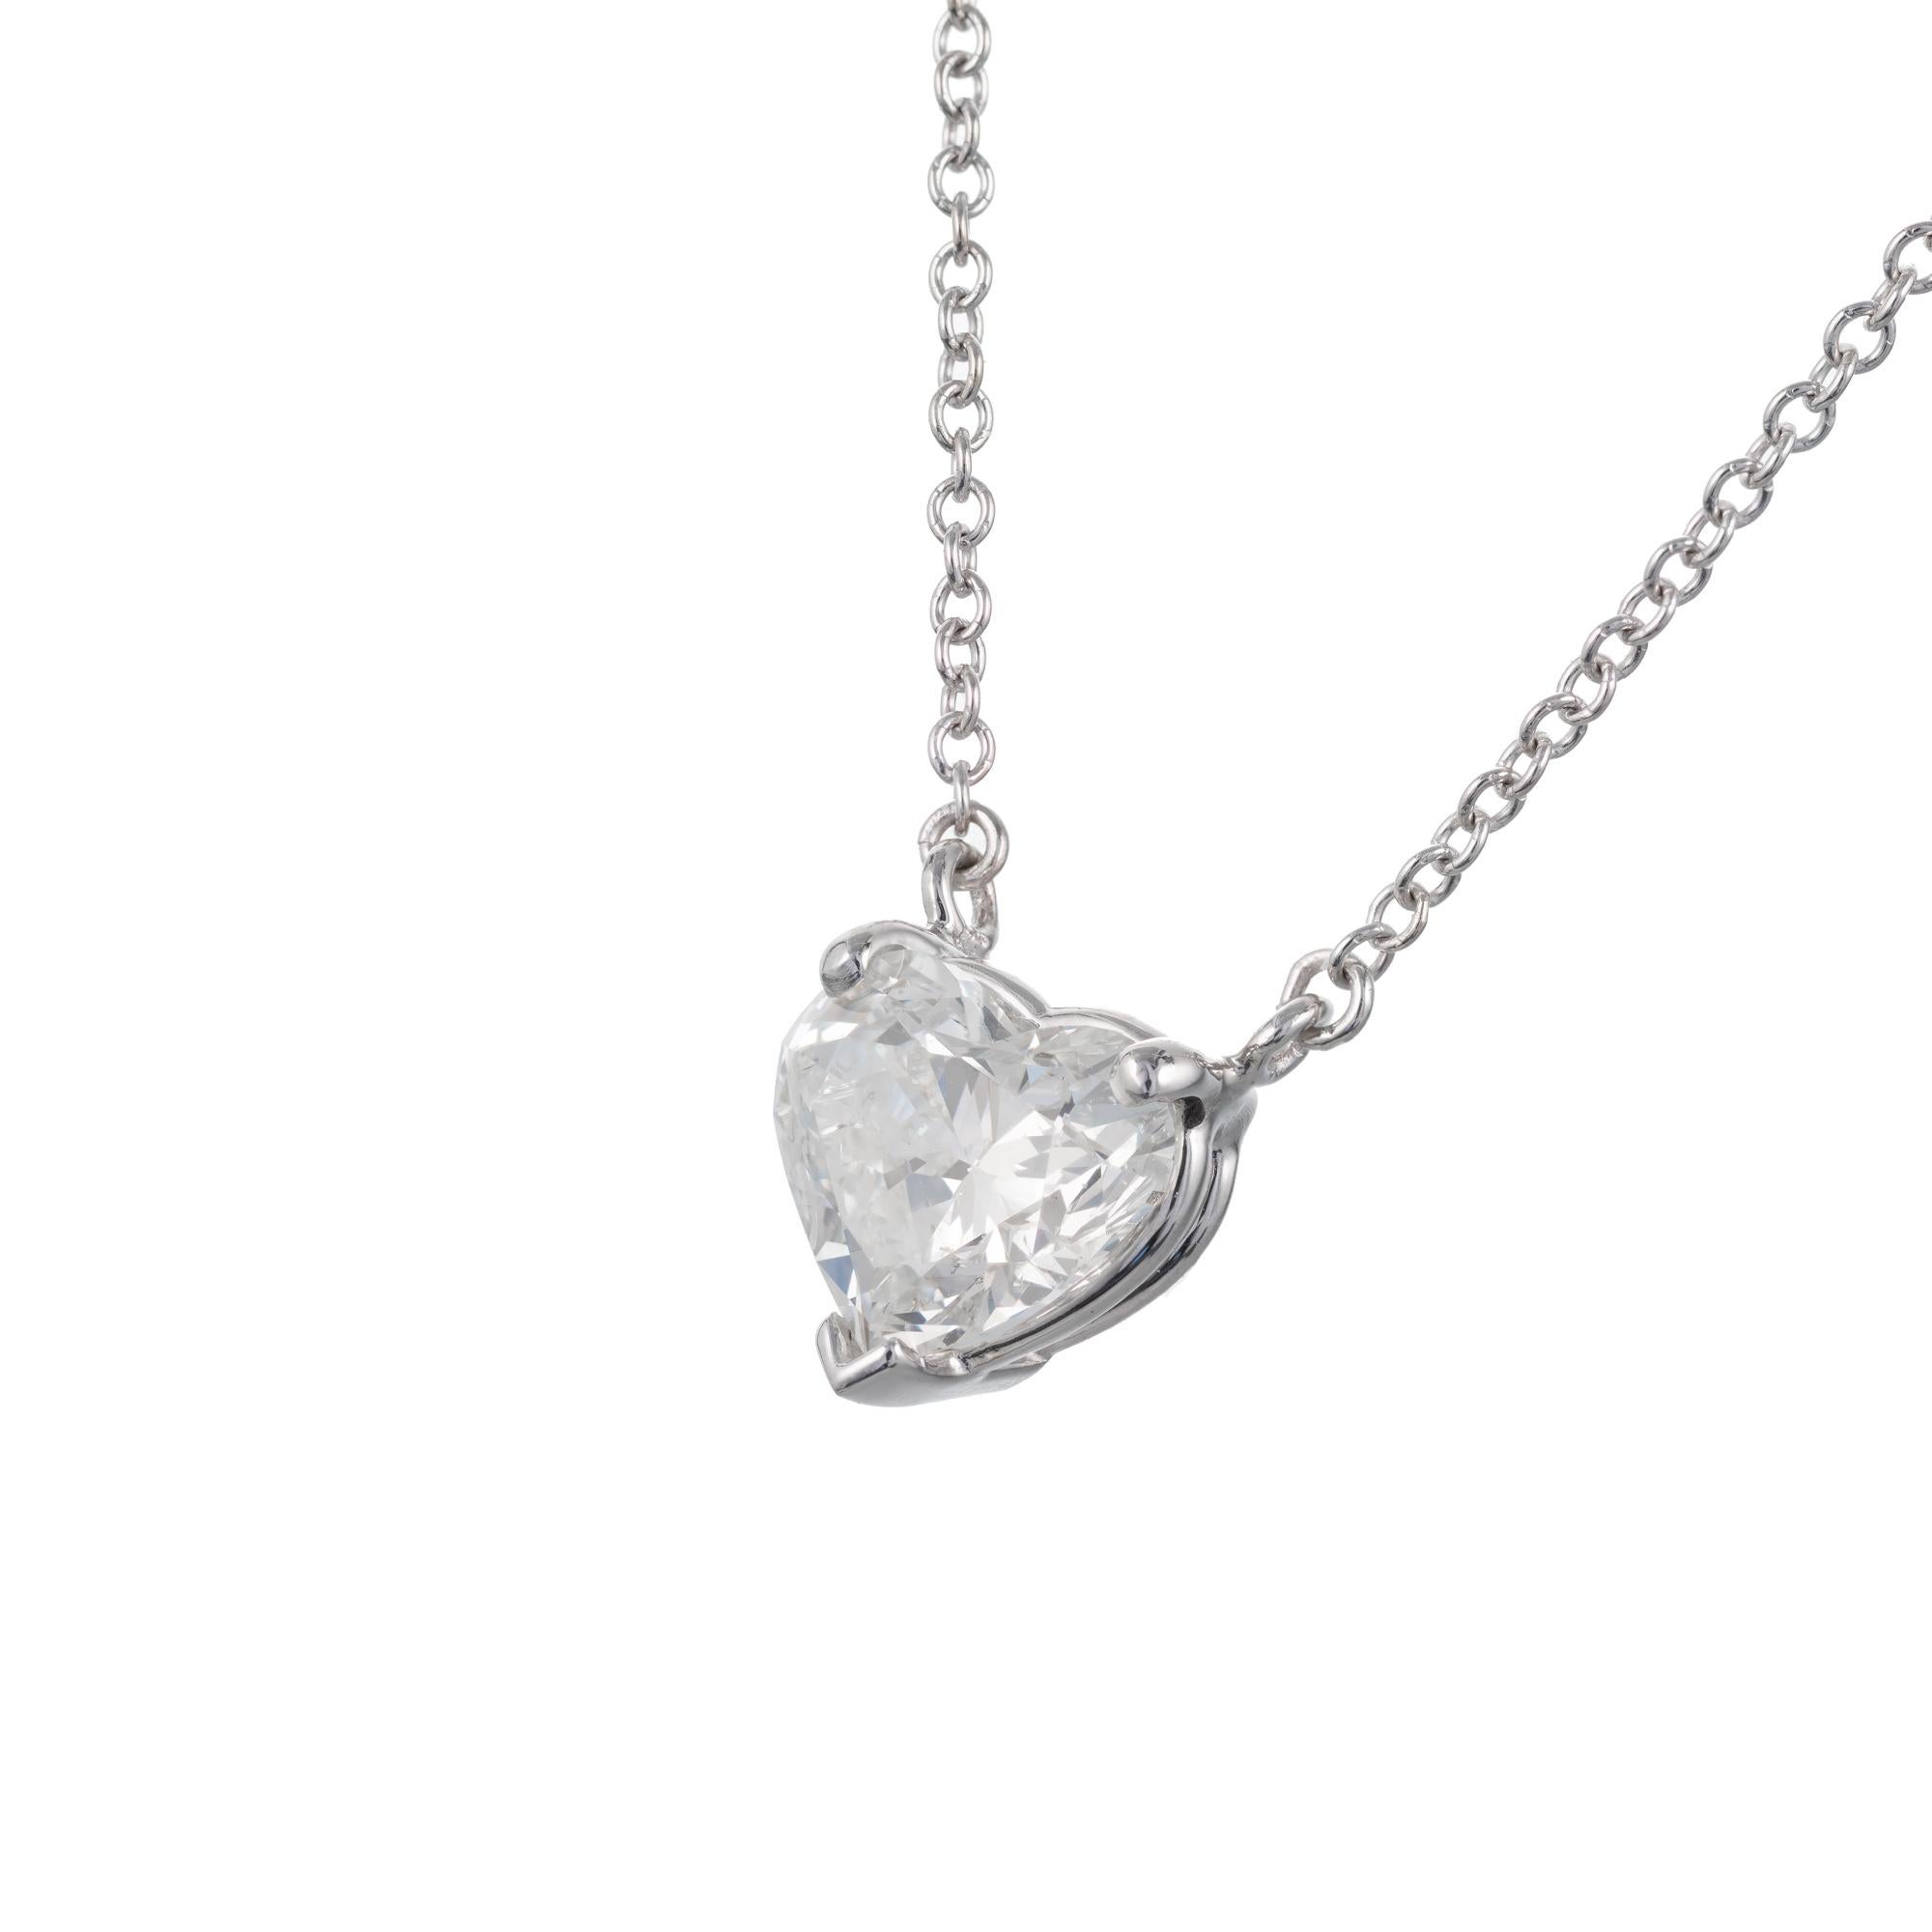 1.05 carat bright sparkly heart shaped diamond pendant necklace. Face up white with just a hint of color.  GIA certified (laser drill ) 

1 heart shape J SI diamond, Approximate 1.05ct GIA Certificate # 2201125139
14k white gold 
Stamped: 14k
1.9